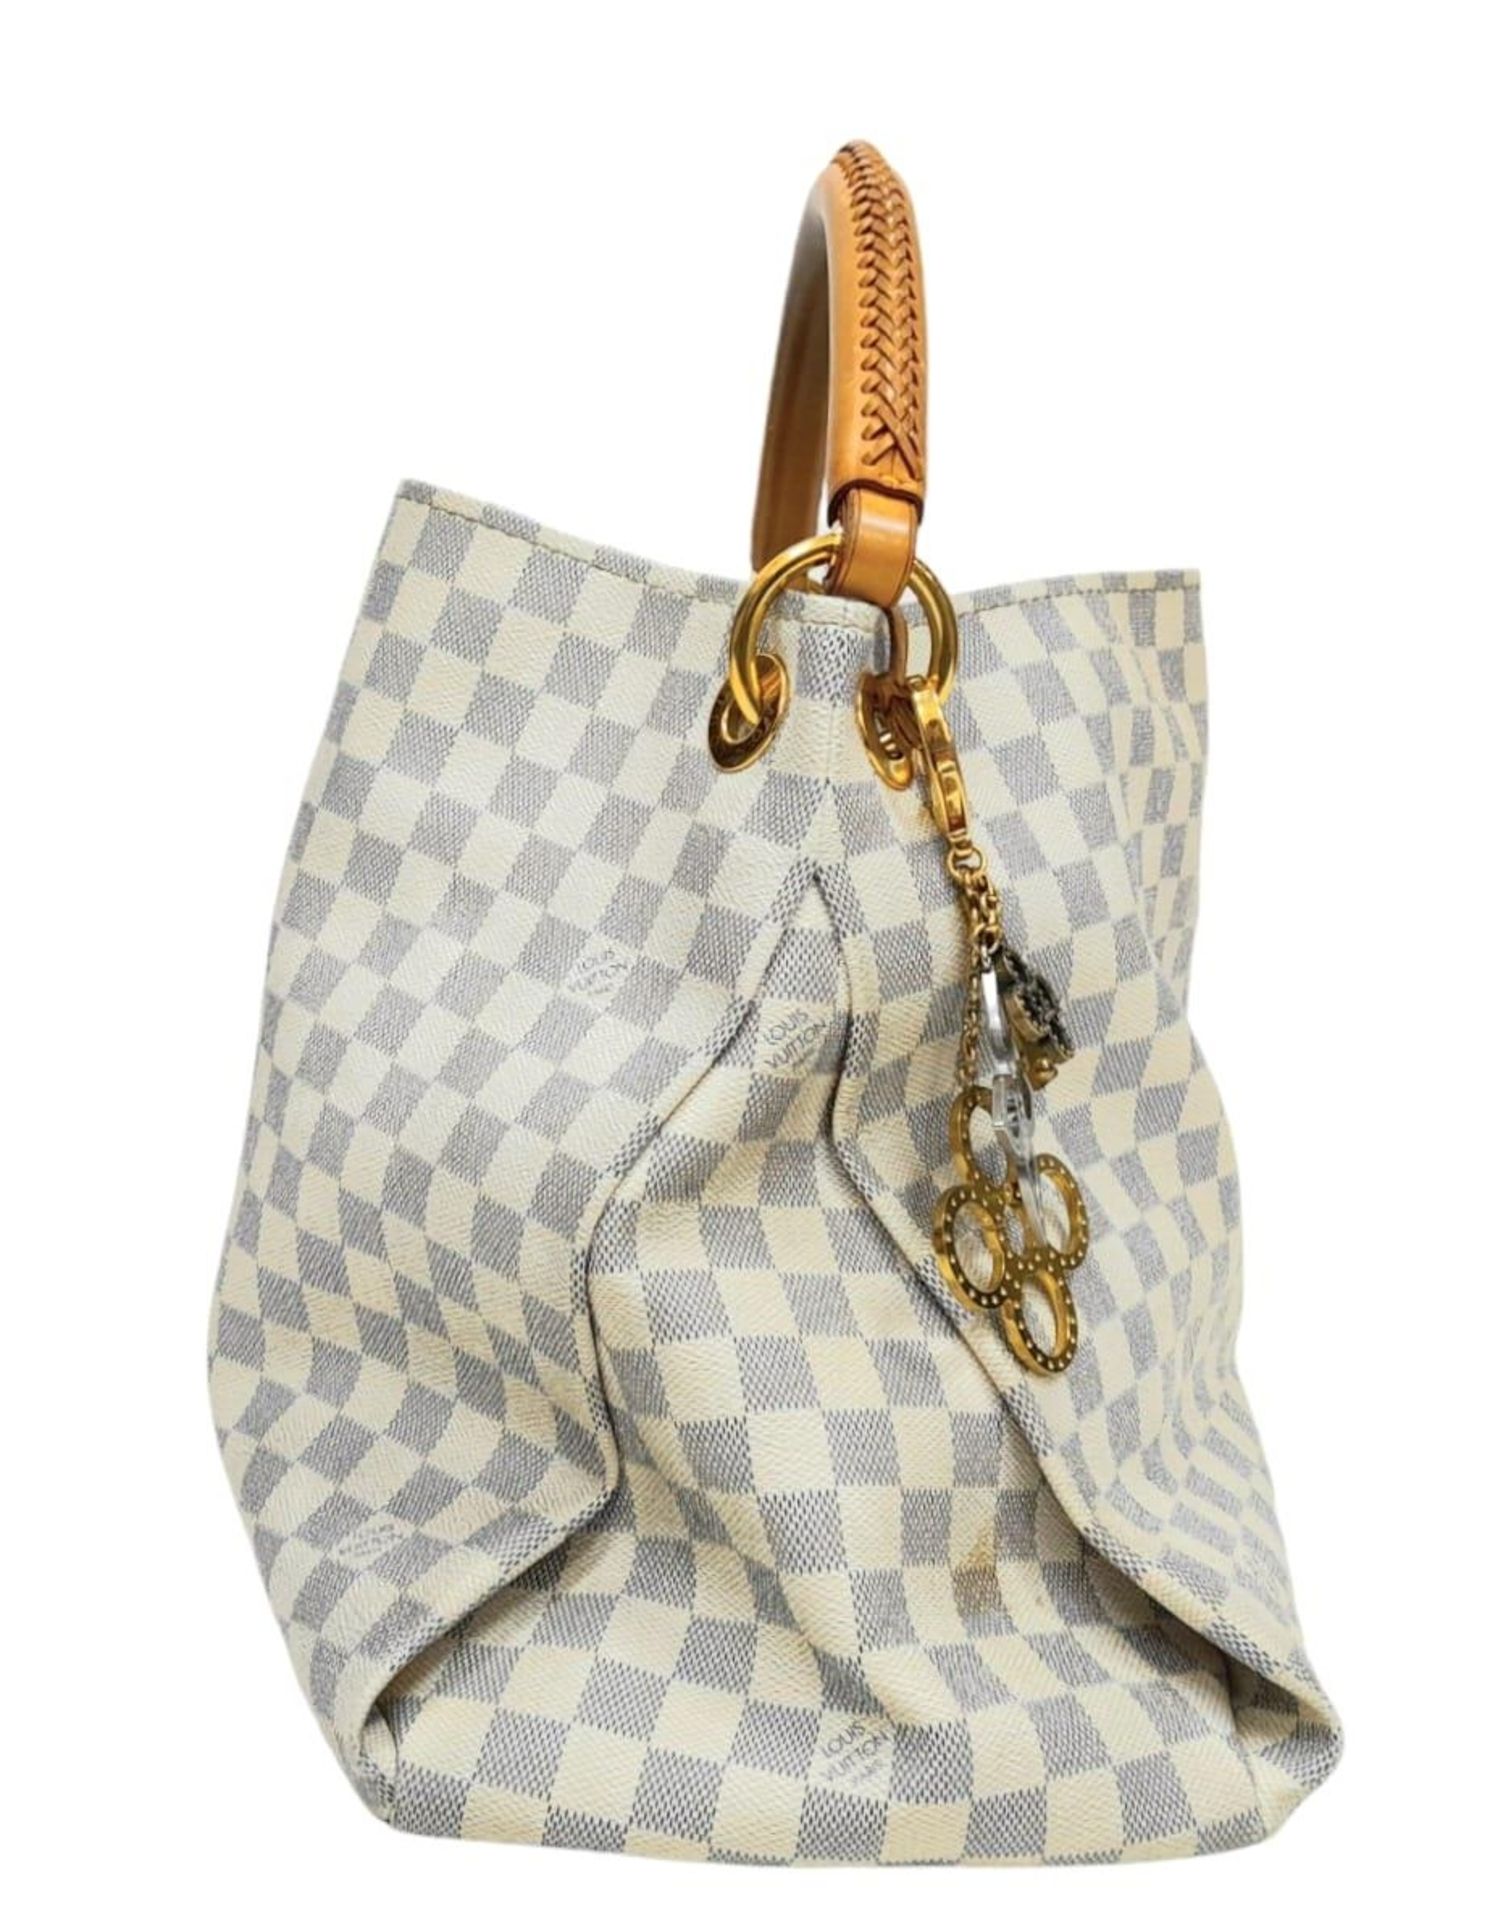 A Louis Vuitton Artsy Damier Azur Canvas Bag. Leather Exterior with Gold-tone Hardware, Short - Image 2 of 7